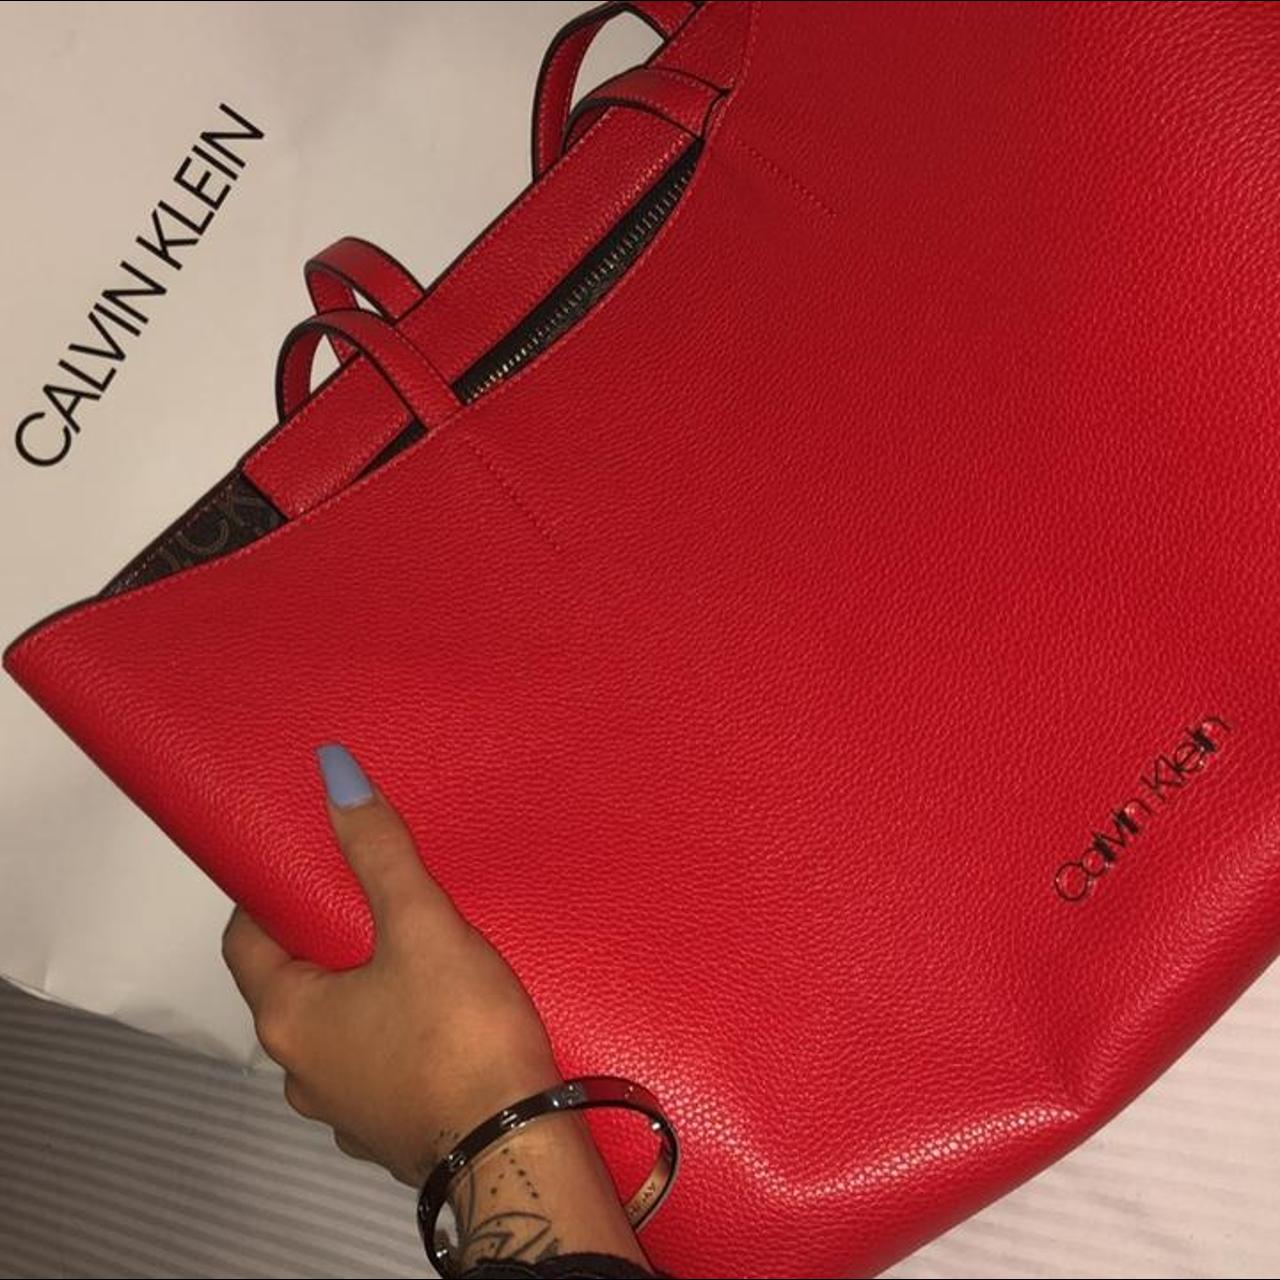 CALVIN KLEIN -TODAY NWT $159.00-MSRP $168.00 RED SIGNATURE TOP HANDLE | eBay